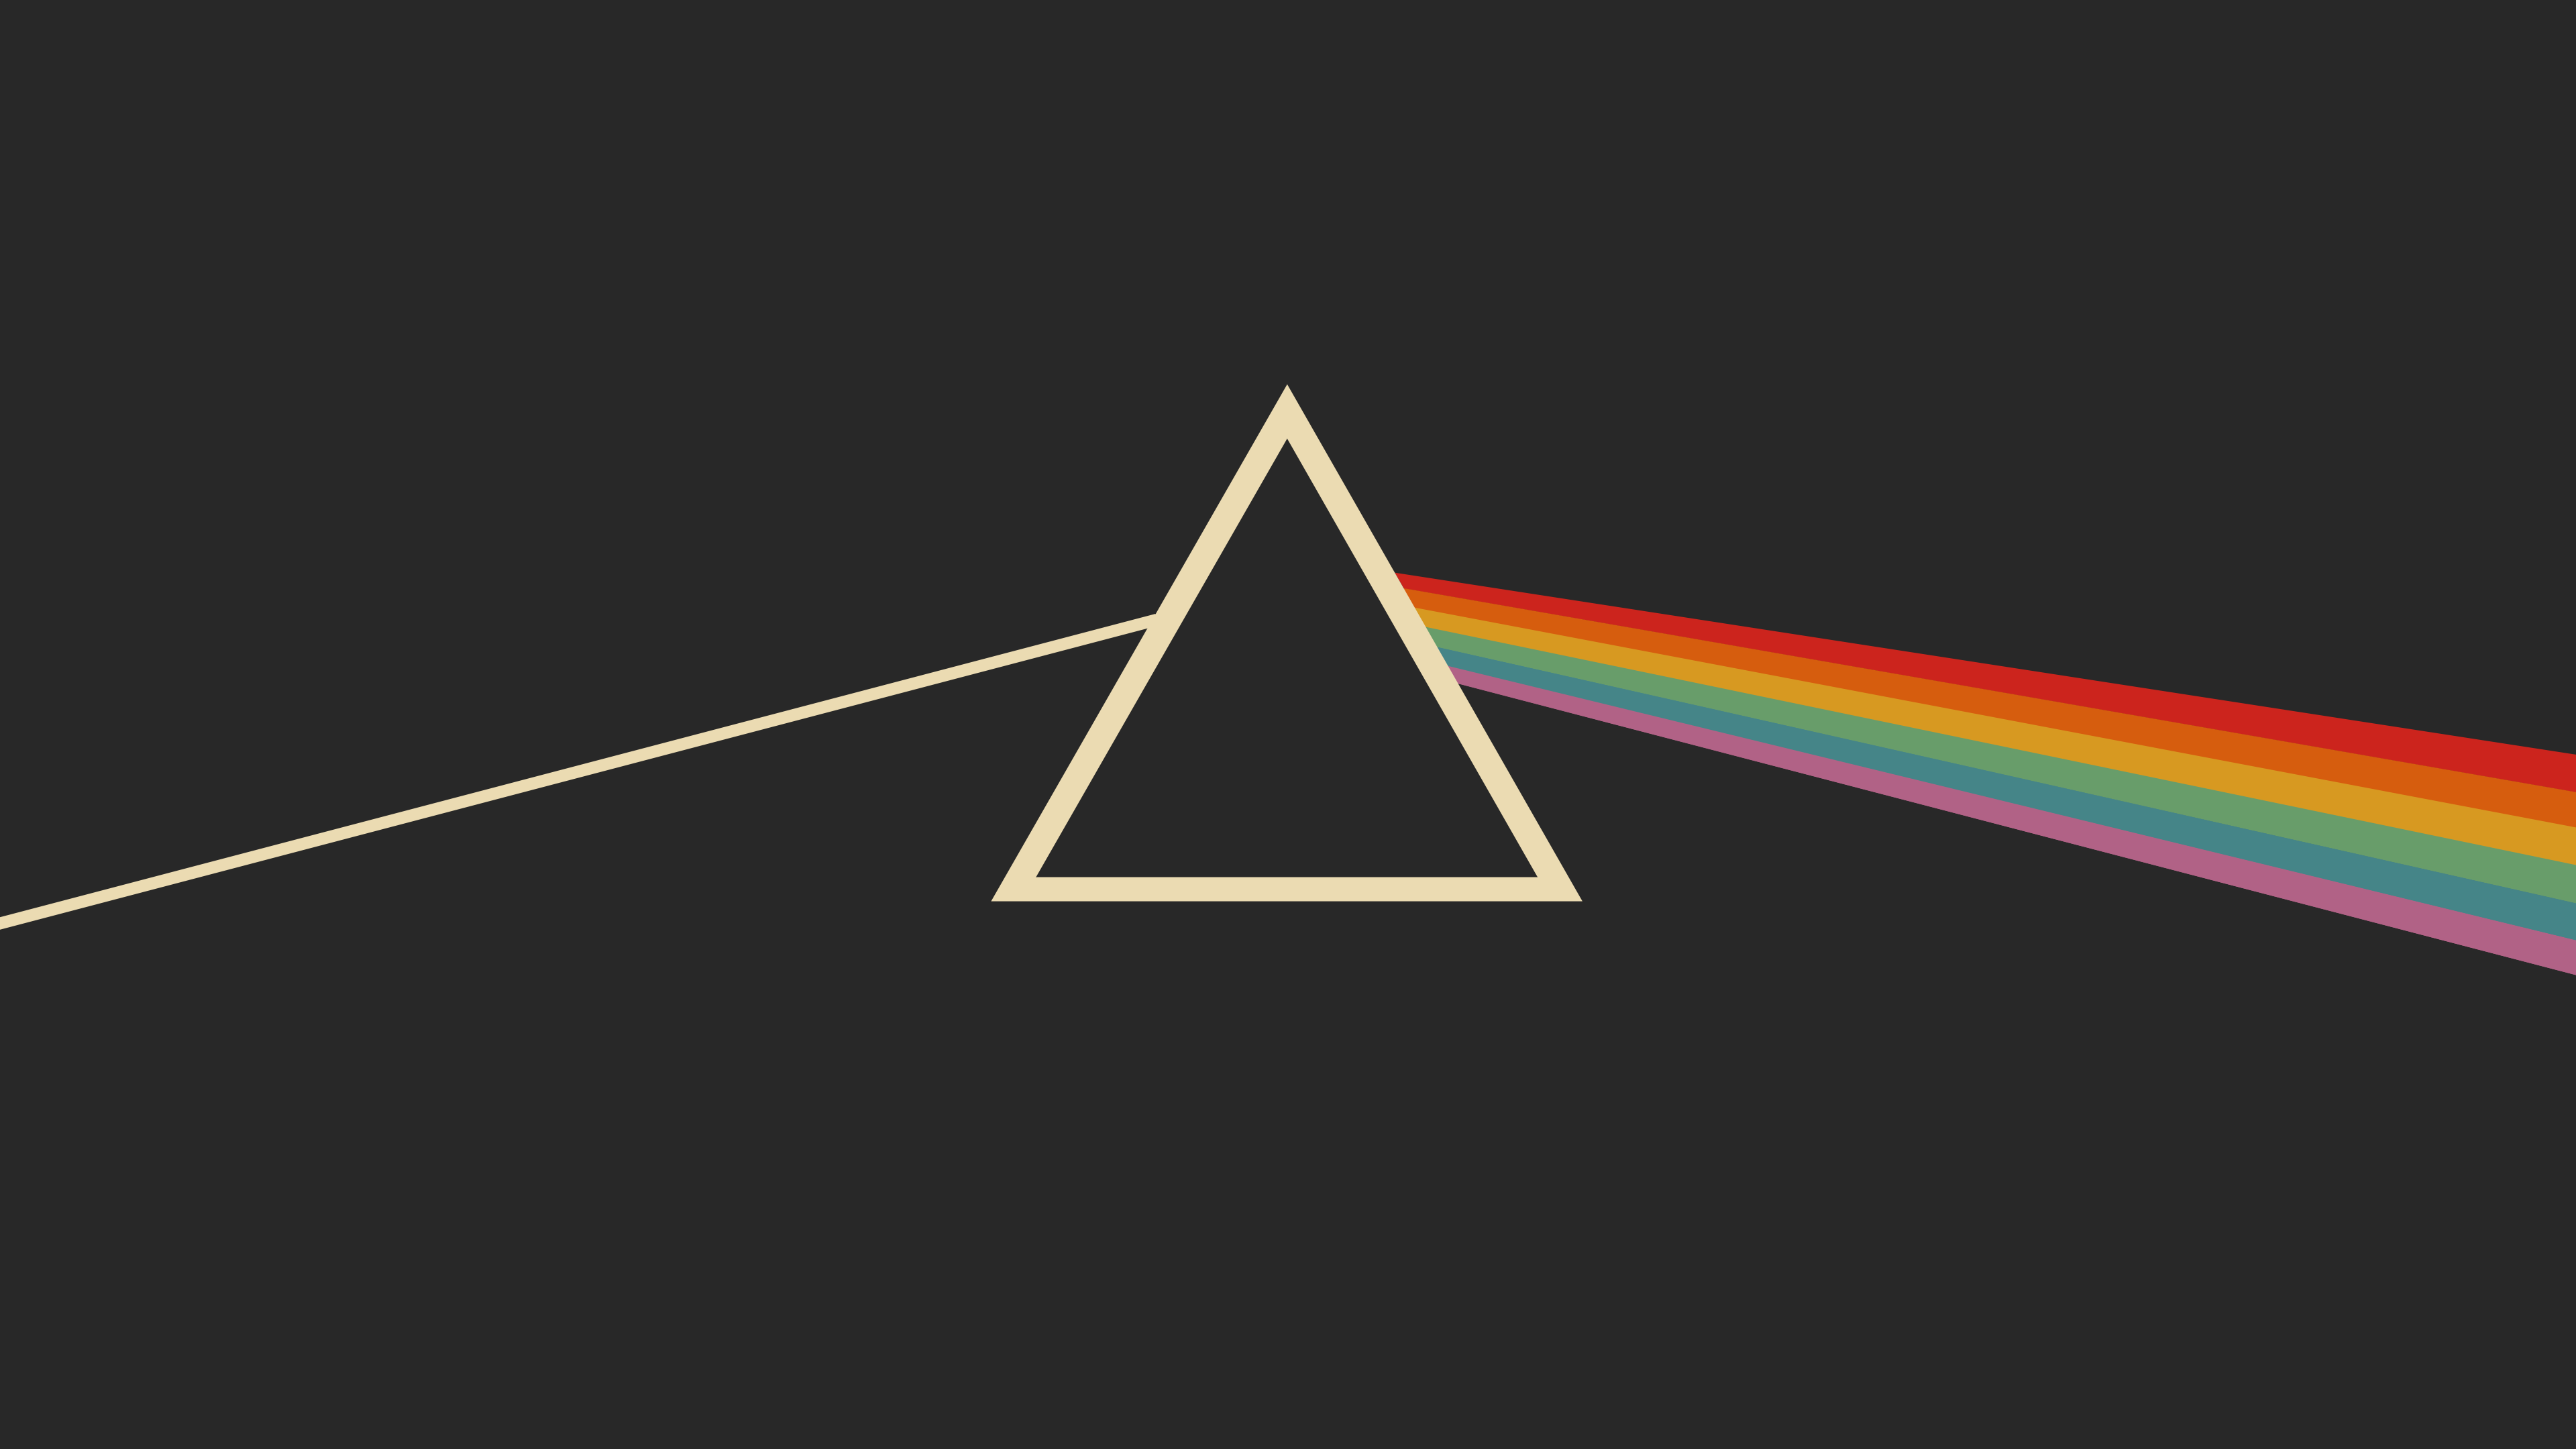 General 3840x2160 gruvbox Refraction minimalism simple background rainbows pyramid album covers Pink Floyd The Dark Side of the Moon progressive rock